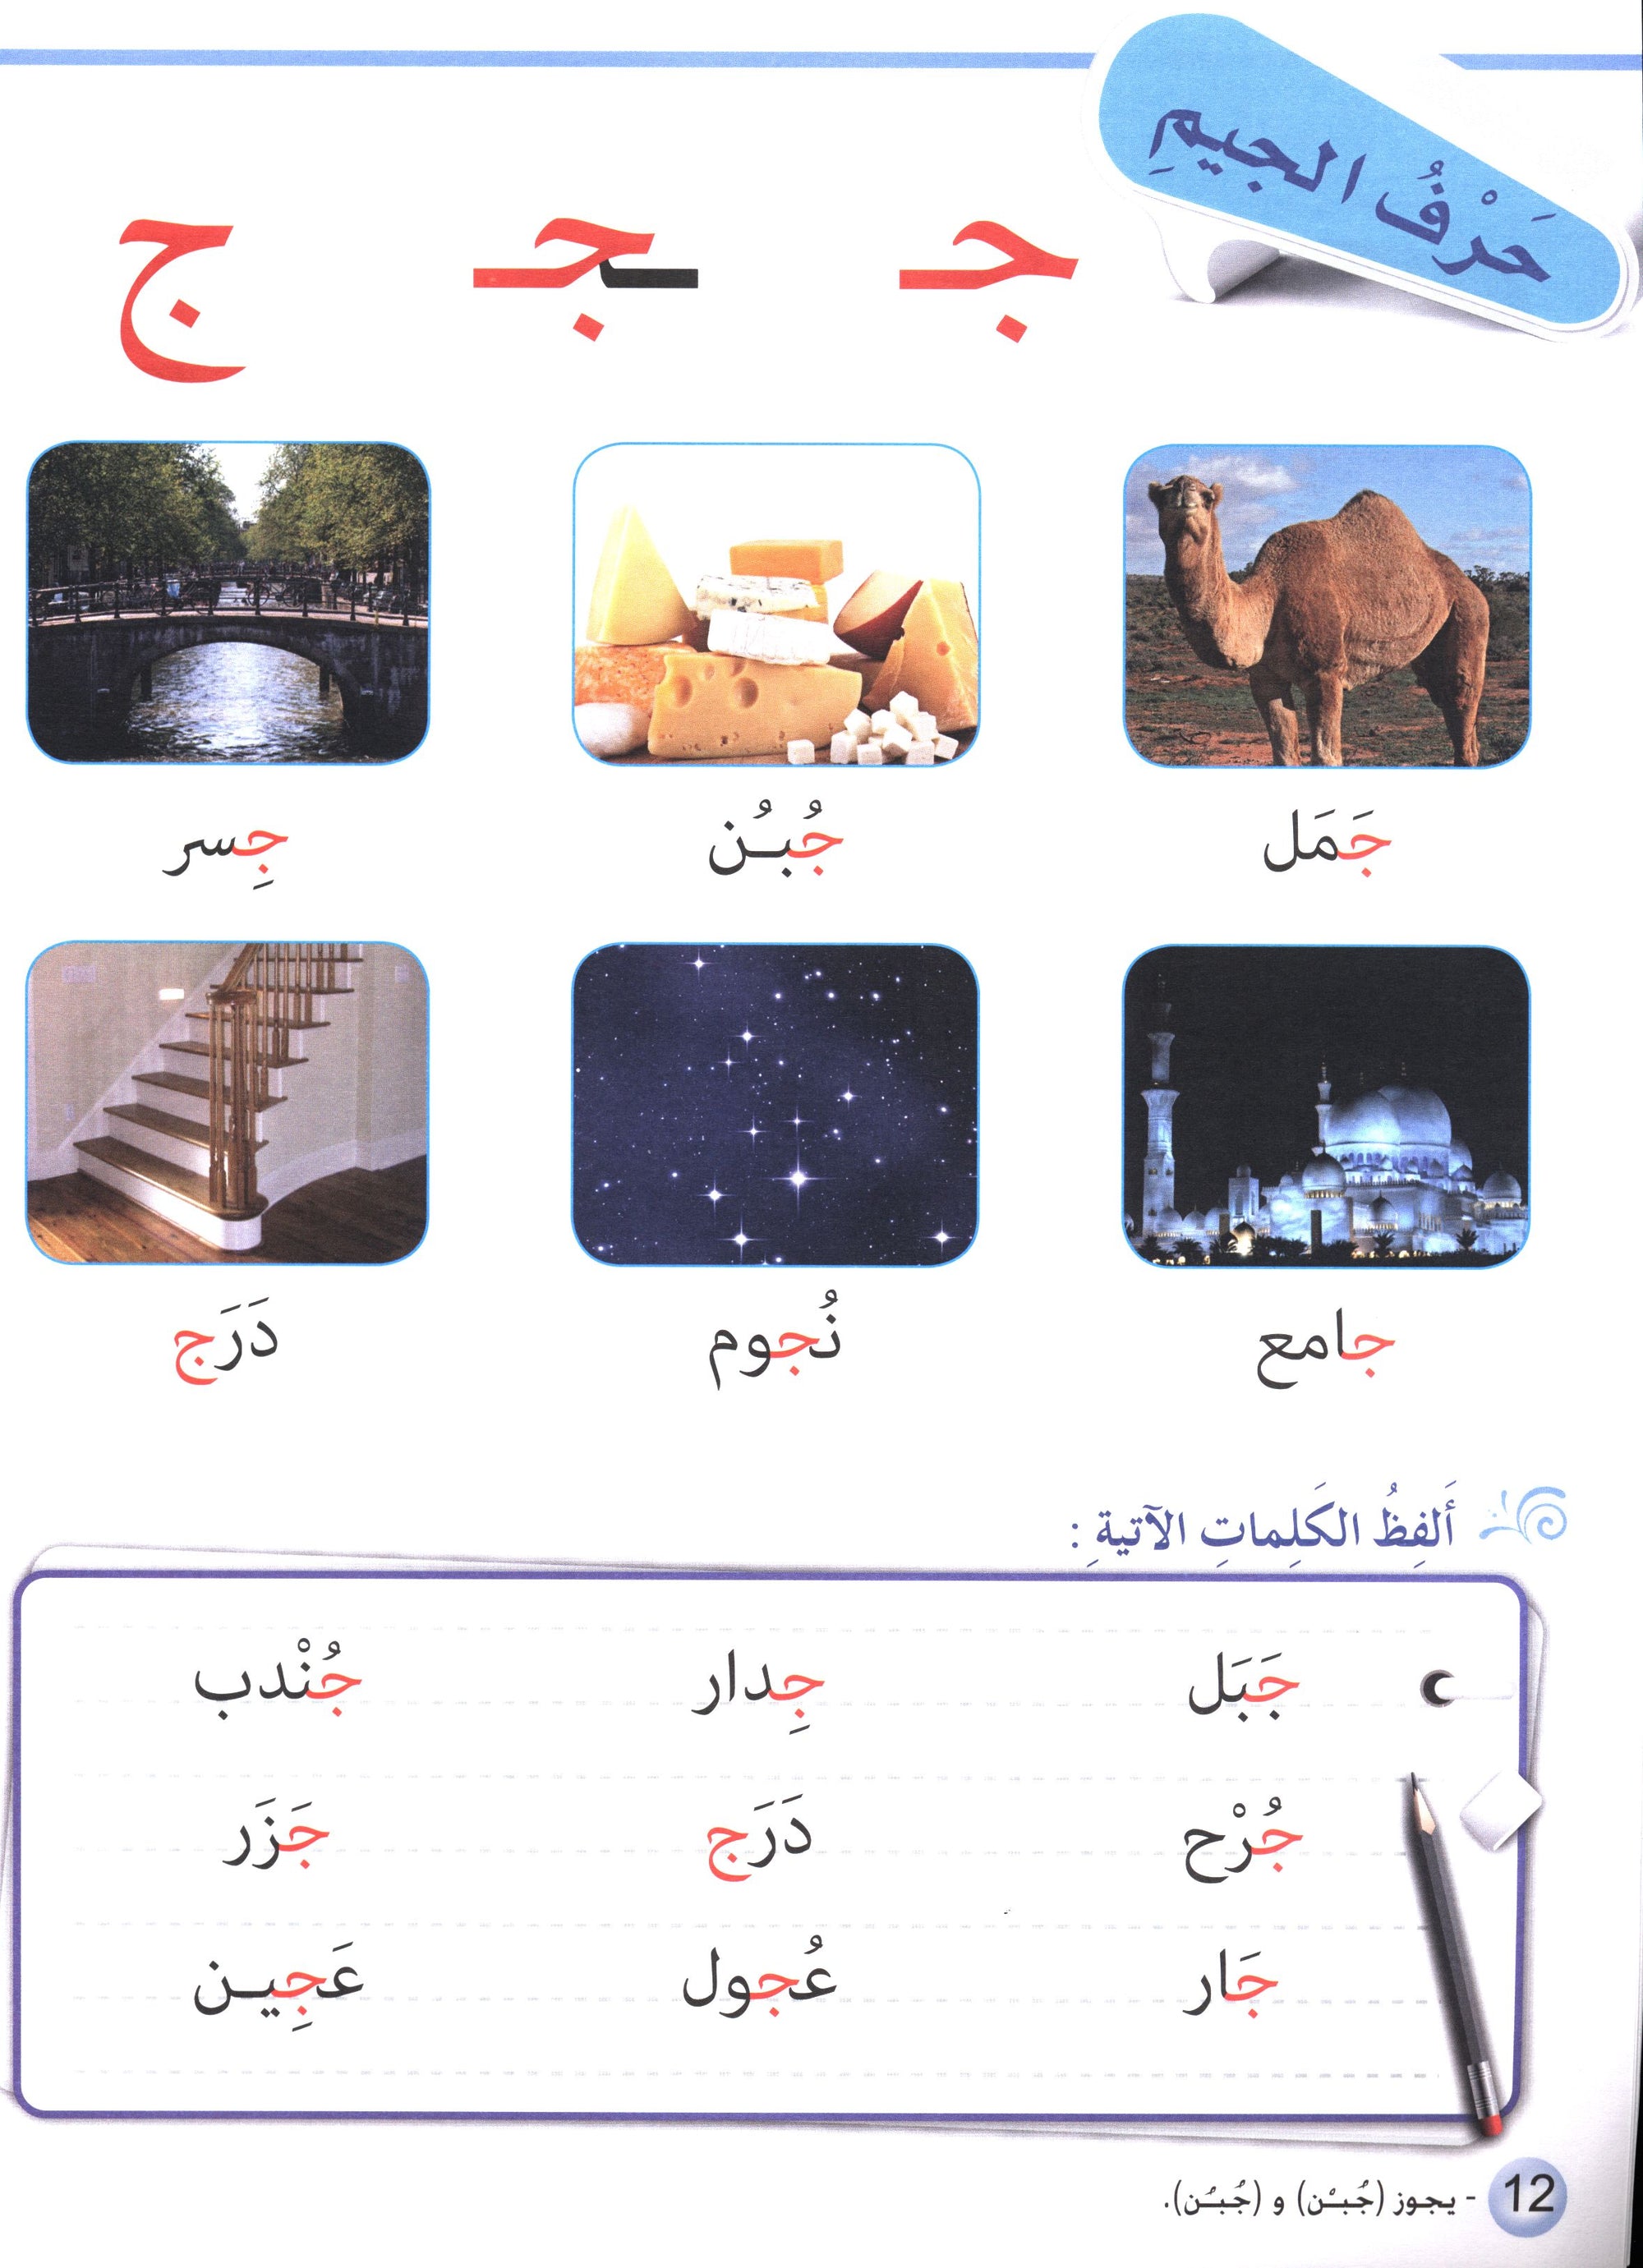 I Love My Language with CD Textbook Level 1 أحبُّ لغتي